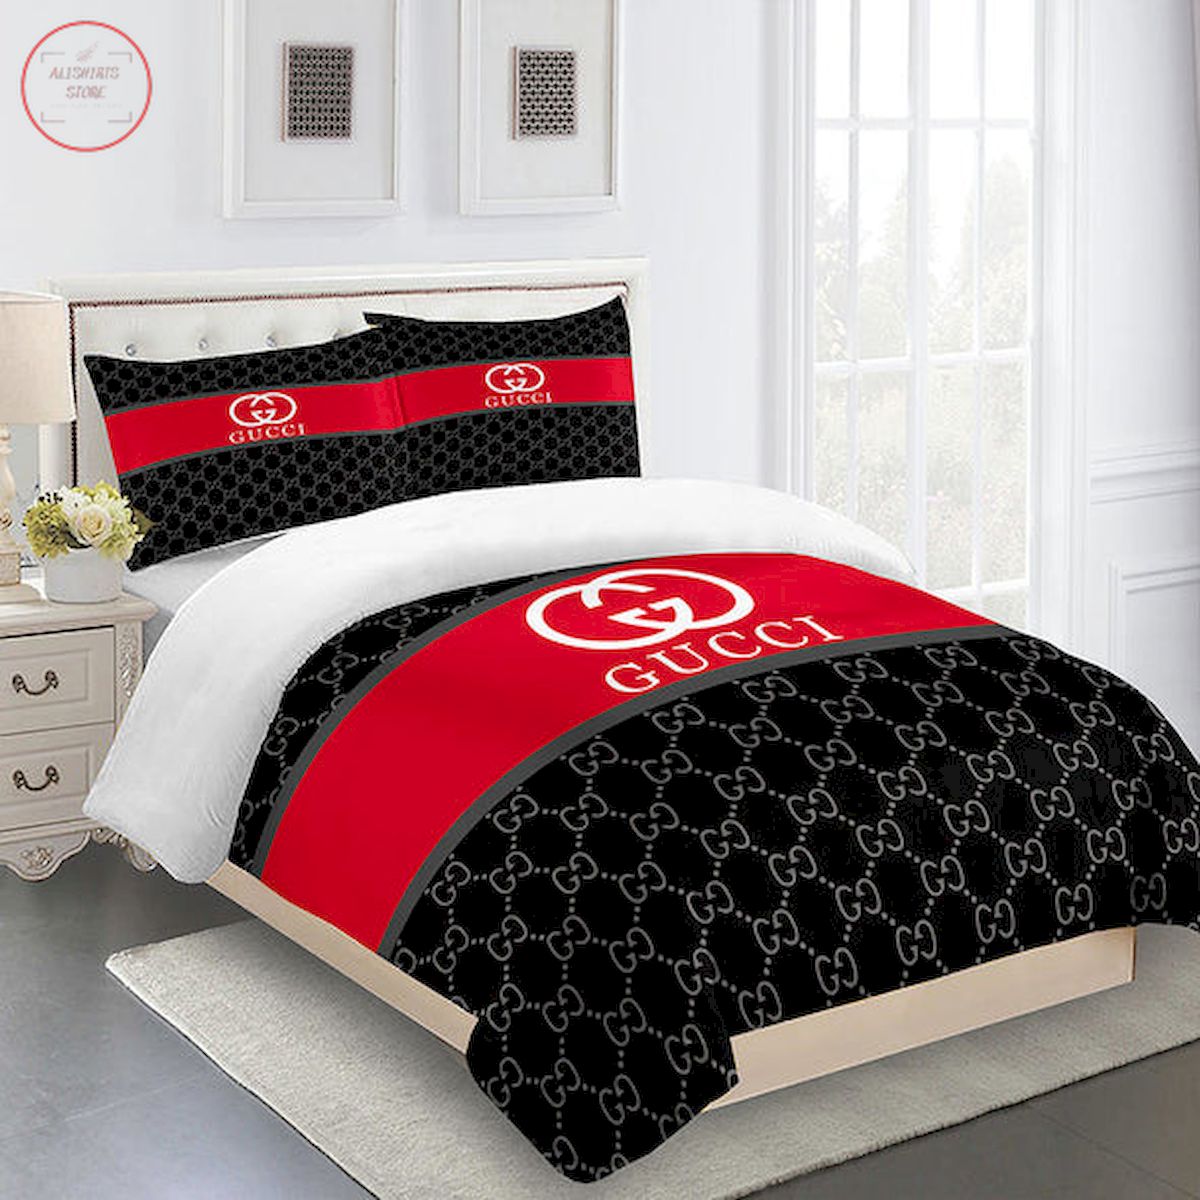 Gucci bedding set red and black Luxury bed sheets